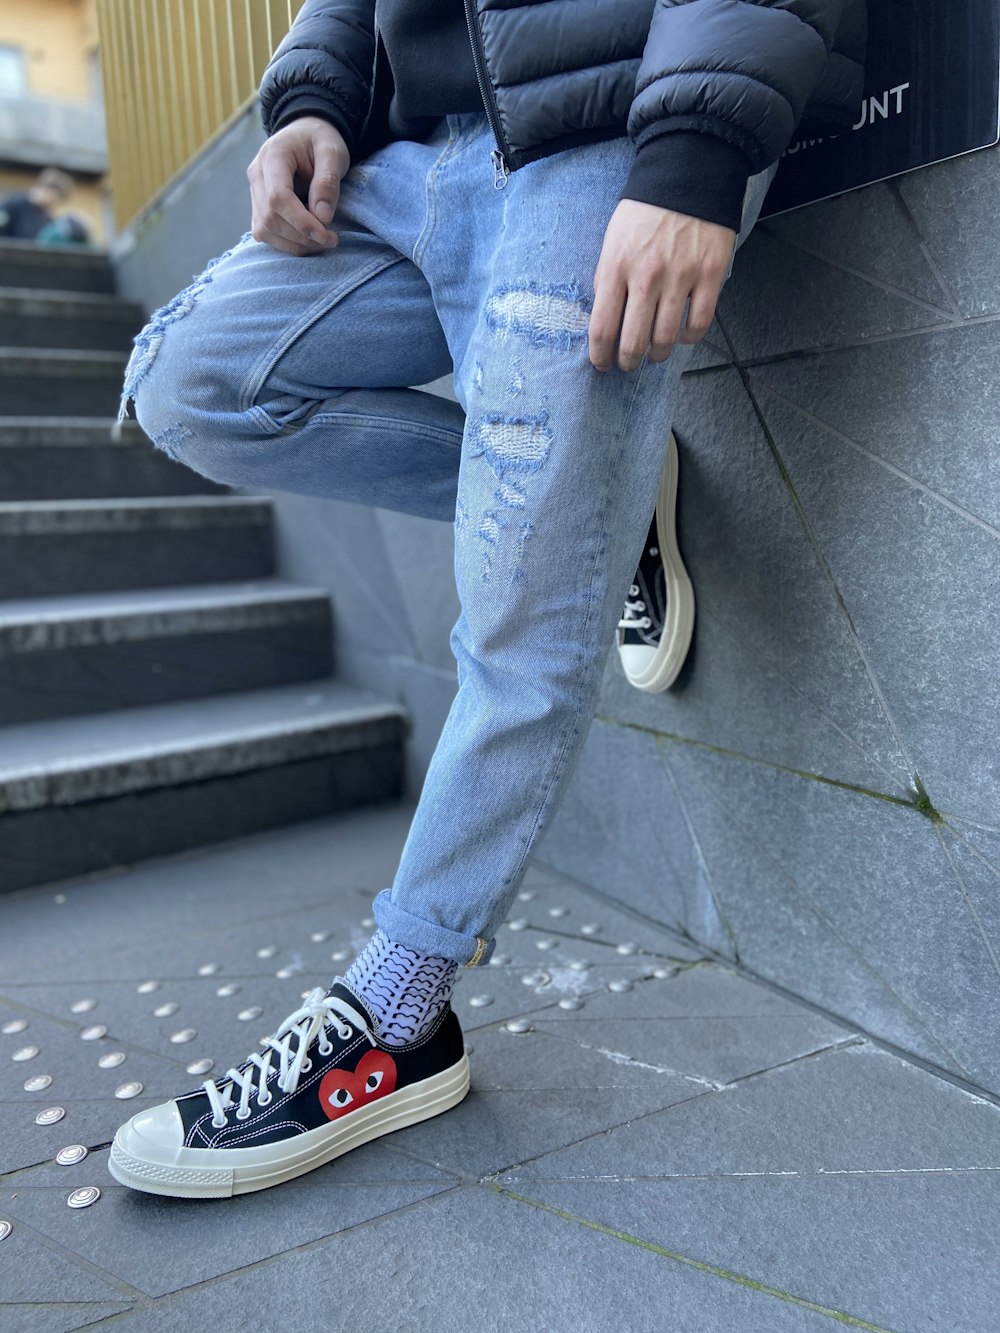 person in denim jeans and black and white converse all star high sneakers photo – Free London Image on Unsplash